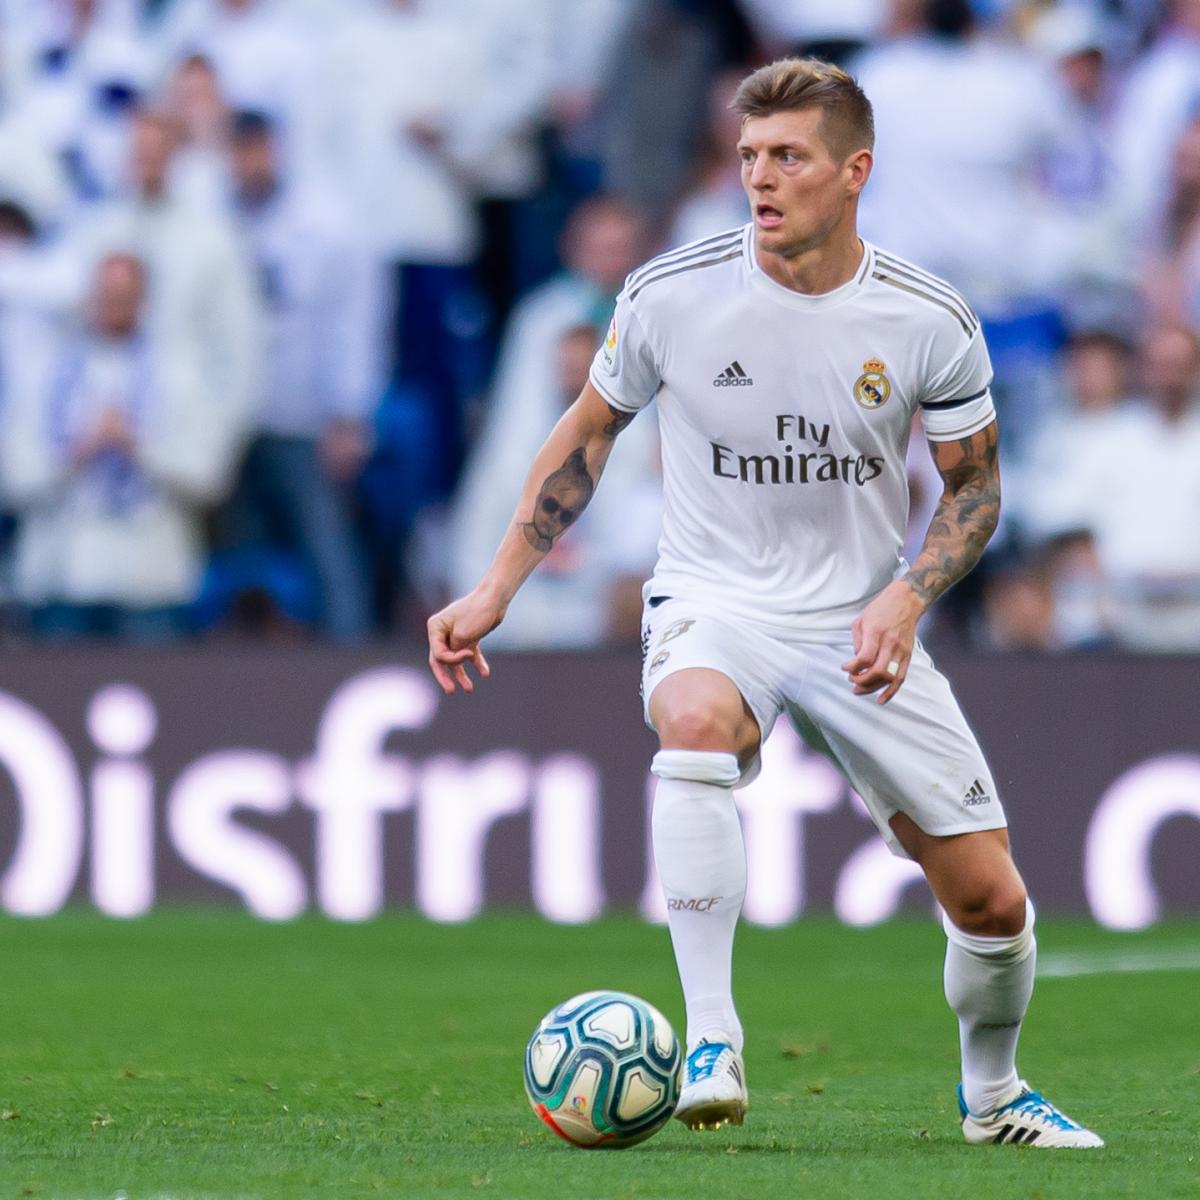 Toni Kroos Talks Retiring After Real Madrid Contract Ends, Won't Play 'Until 38'. Bleacher Report. Latest News, Videos and Highlights